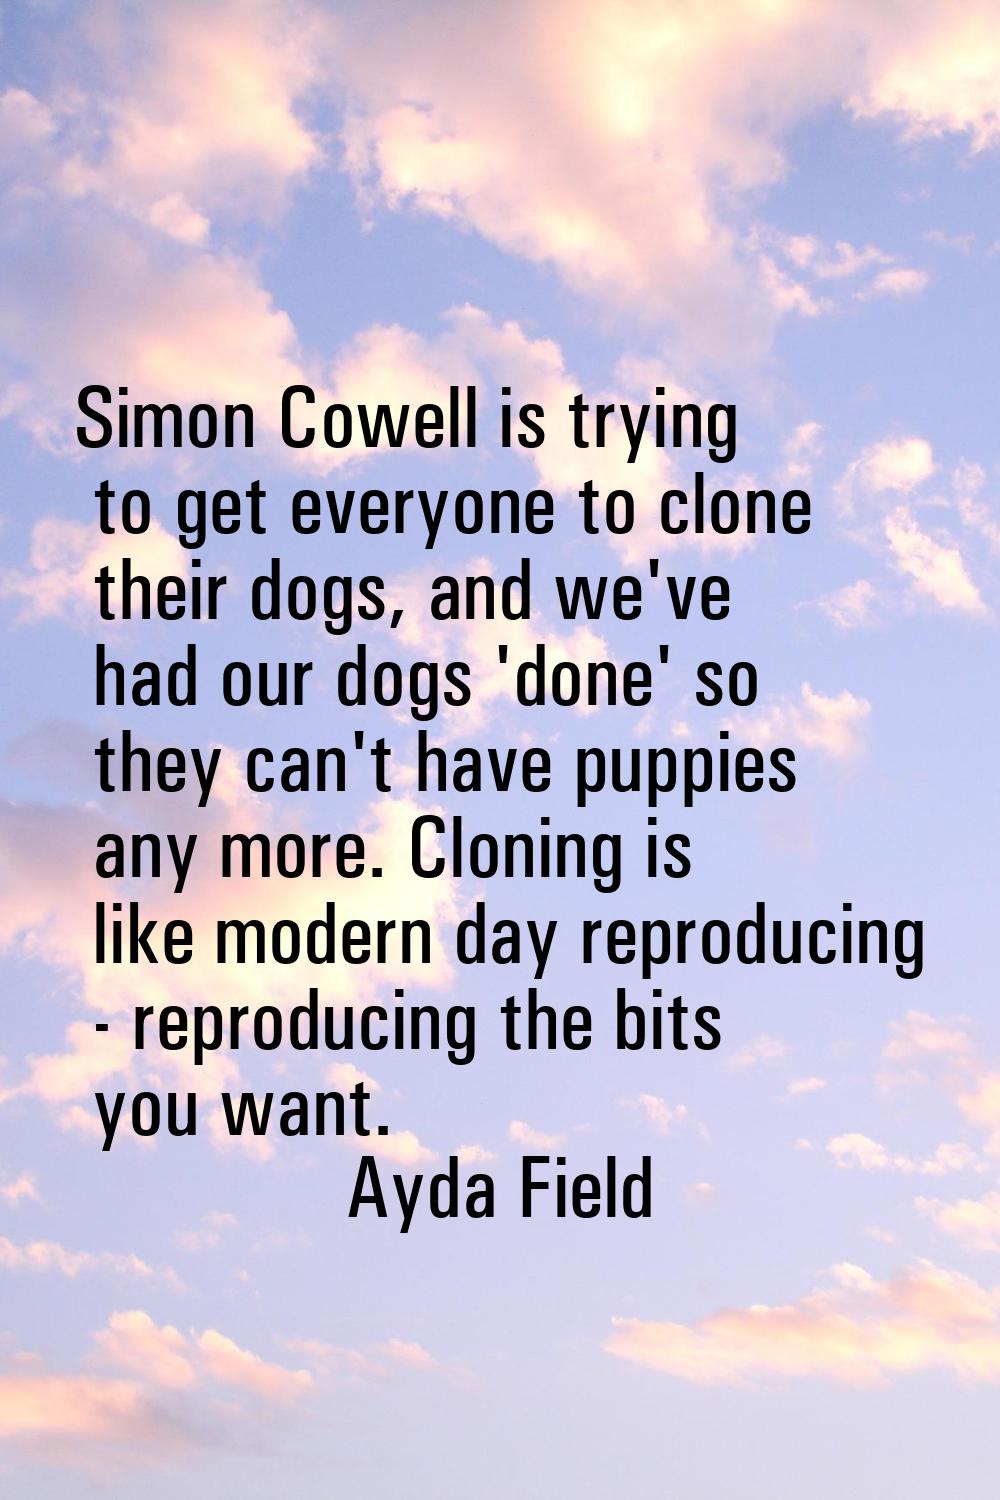 Simon Cowell is trying to get everyone to clone their dogs, and we've had our dogs 'done' so they c